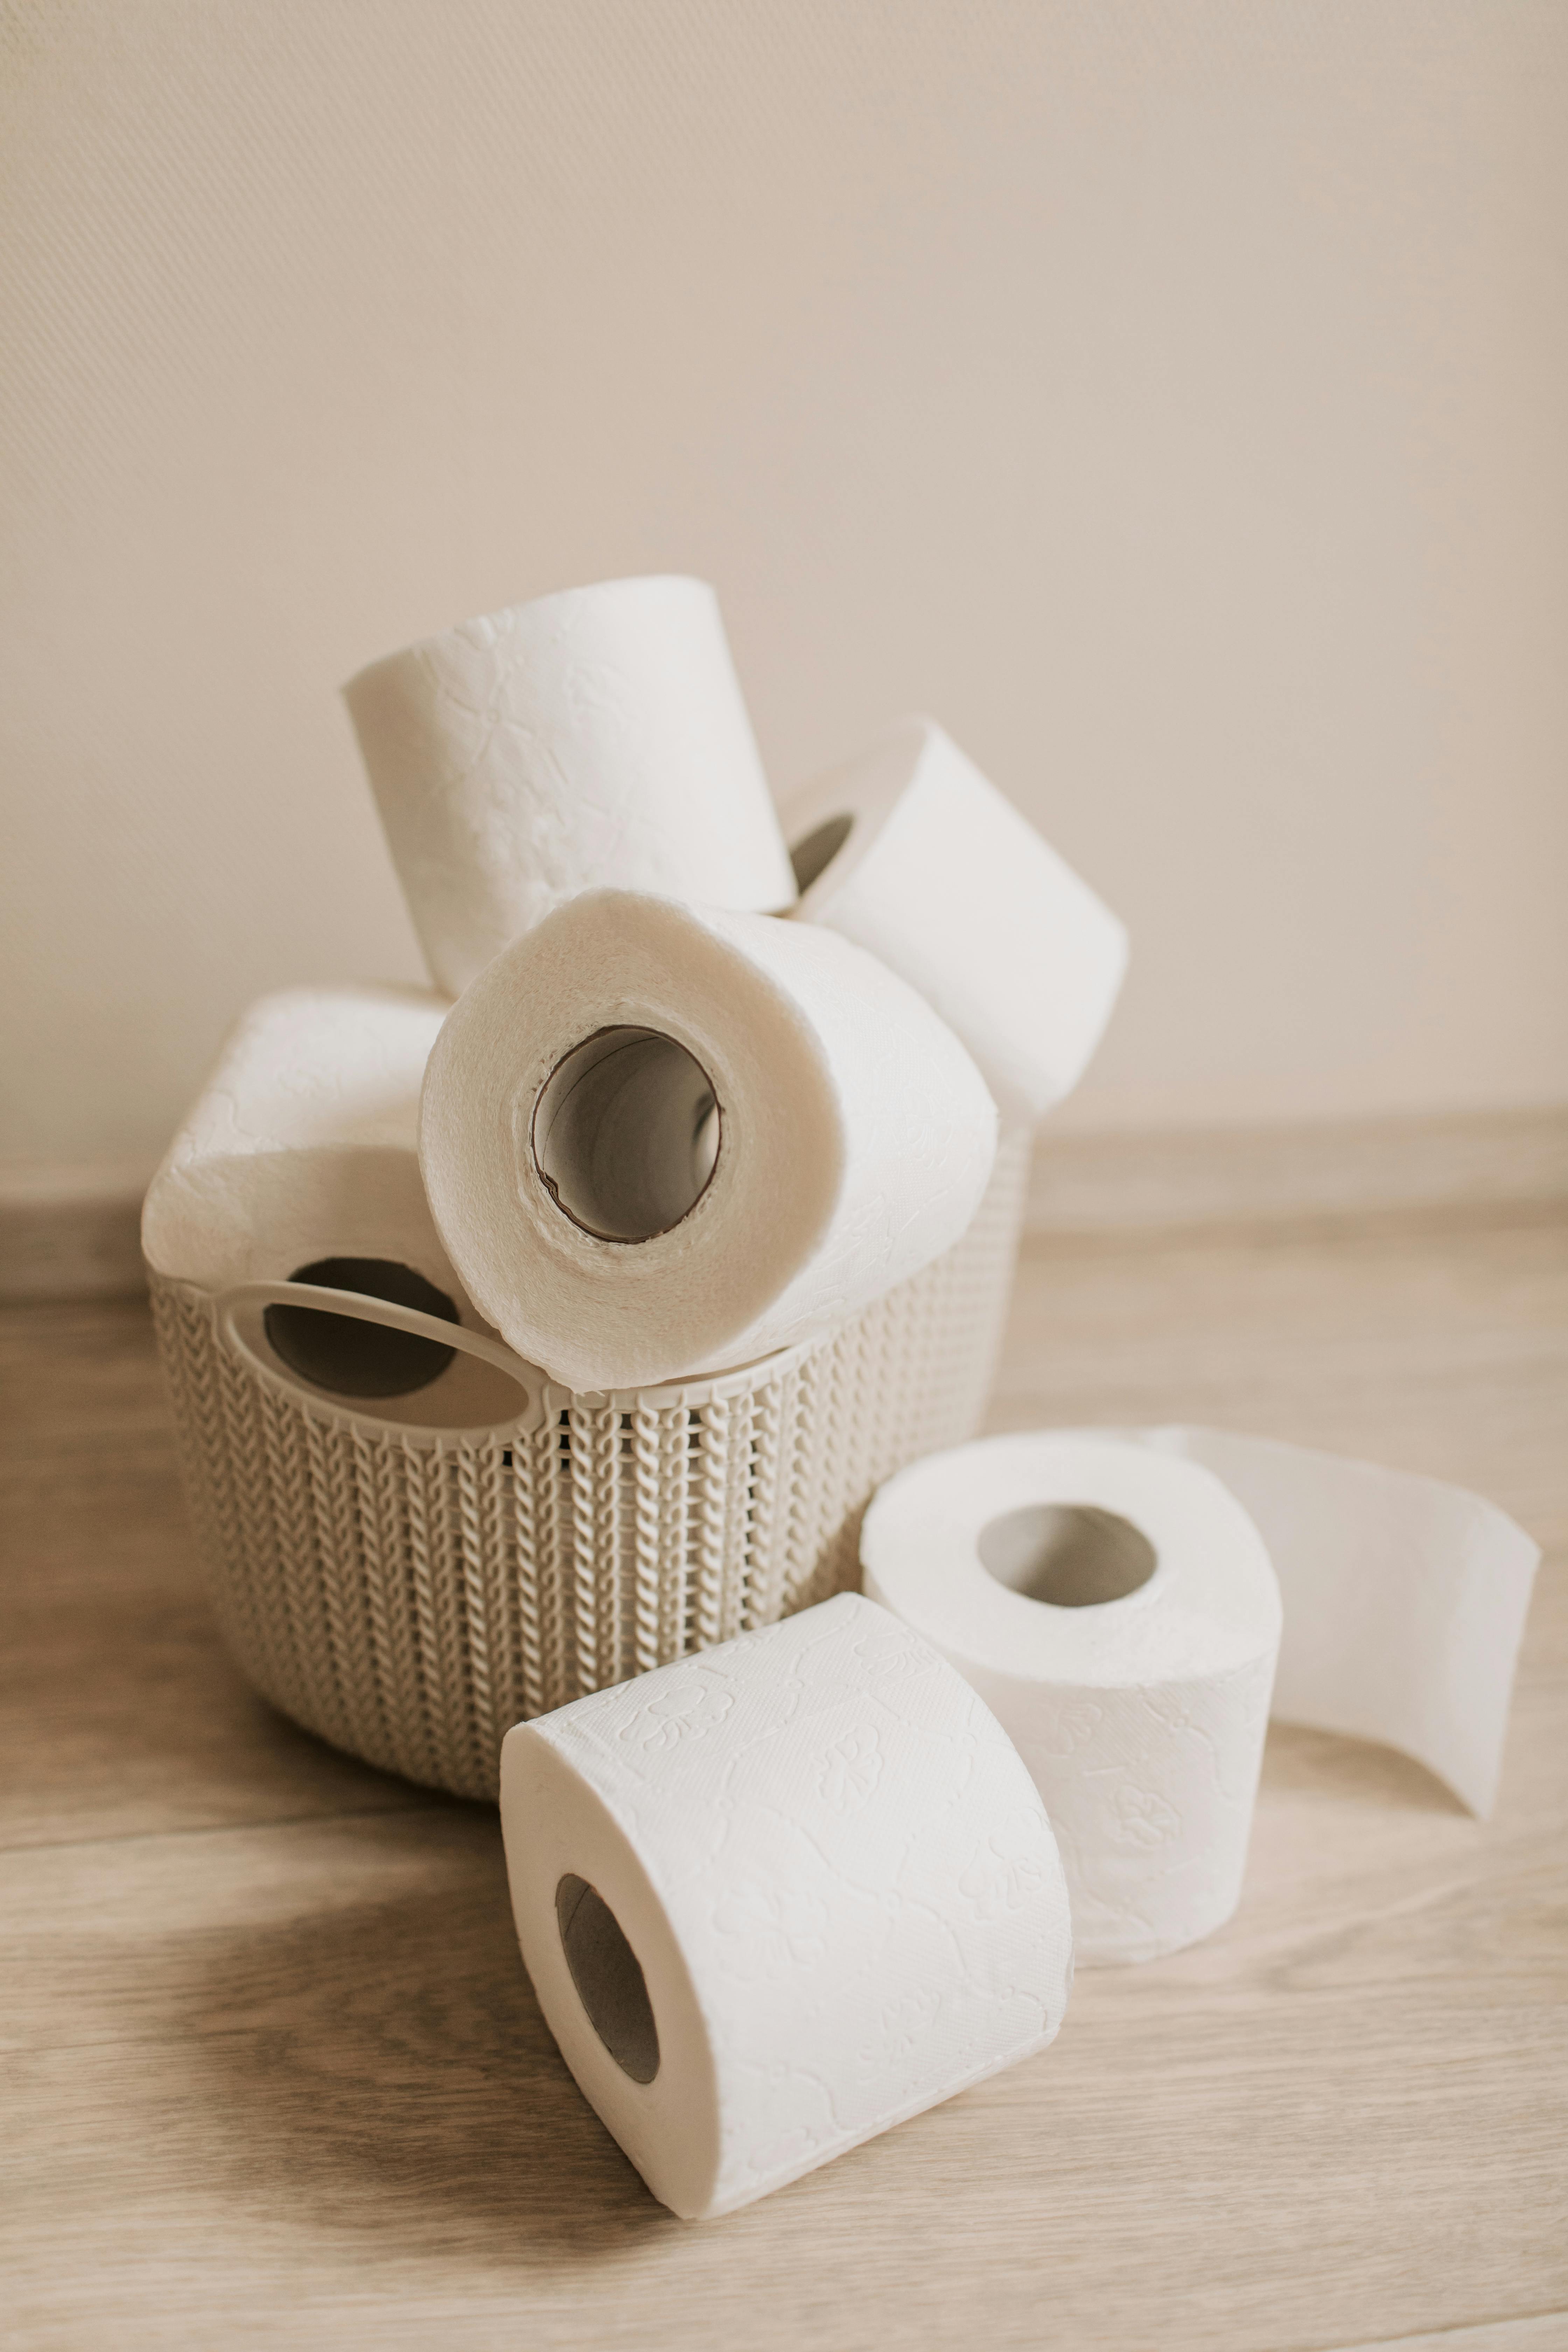 Why Does My Toilet Gurgle After I Flush? | Ask A Plumber By Mr. Rooter Plumbing